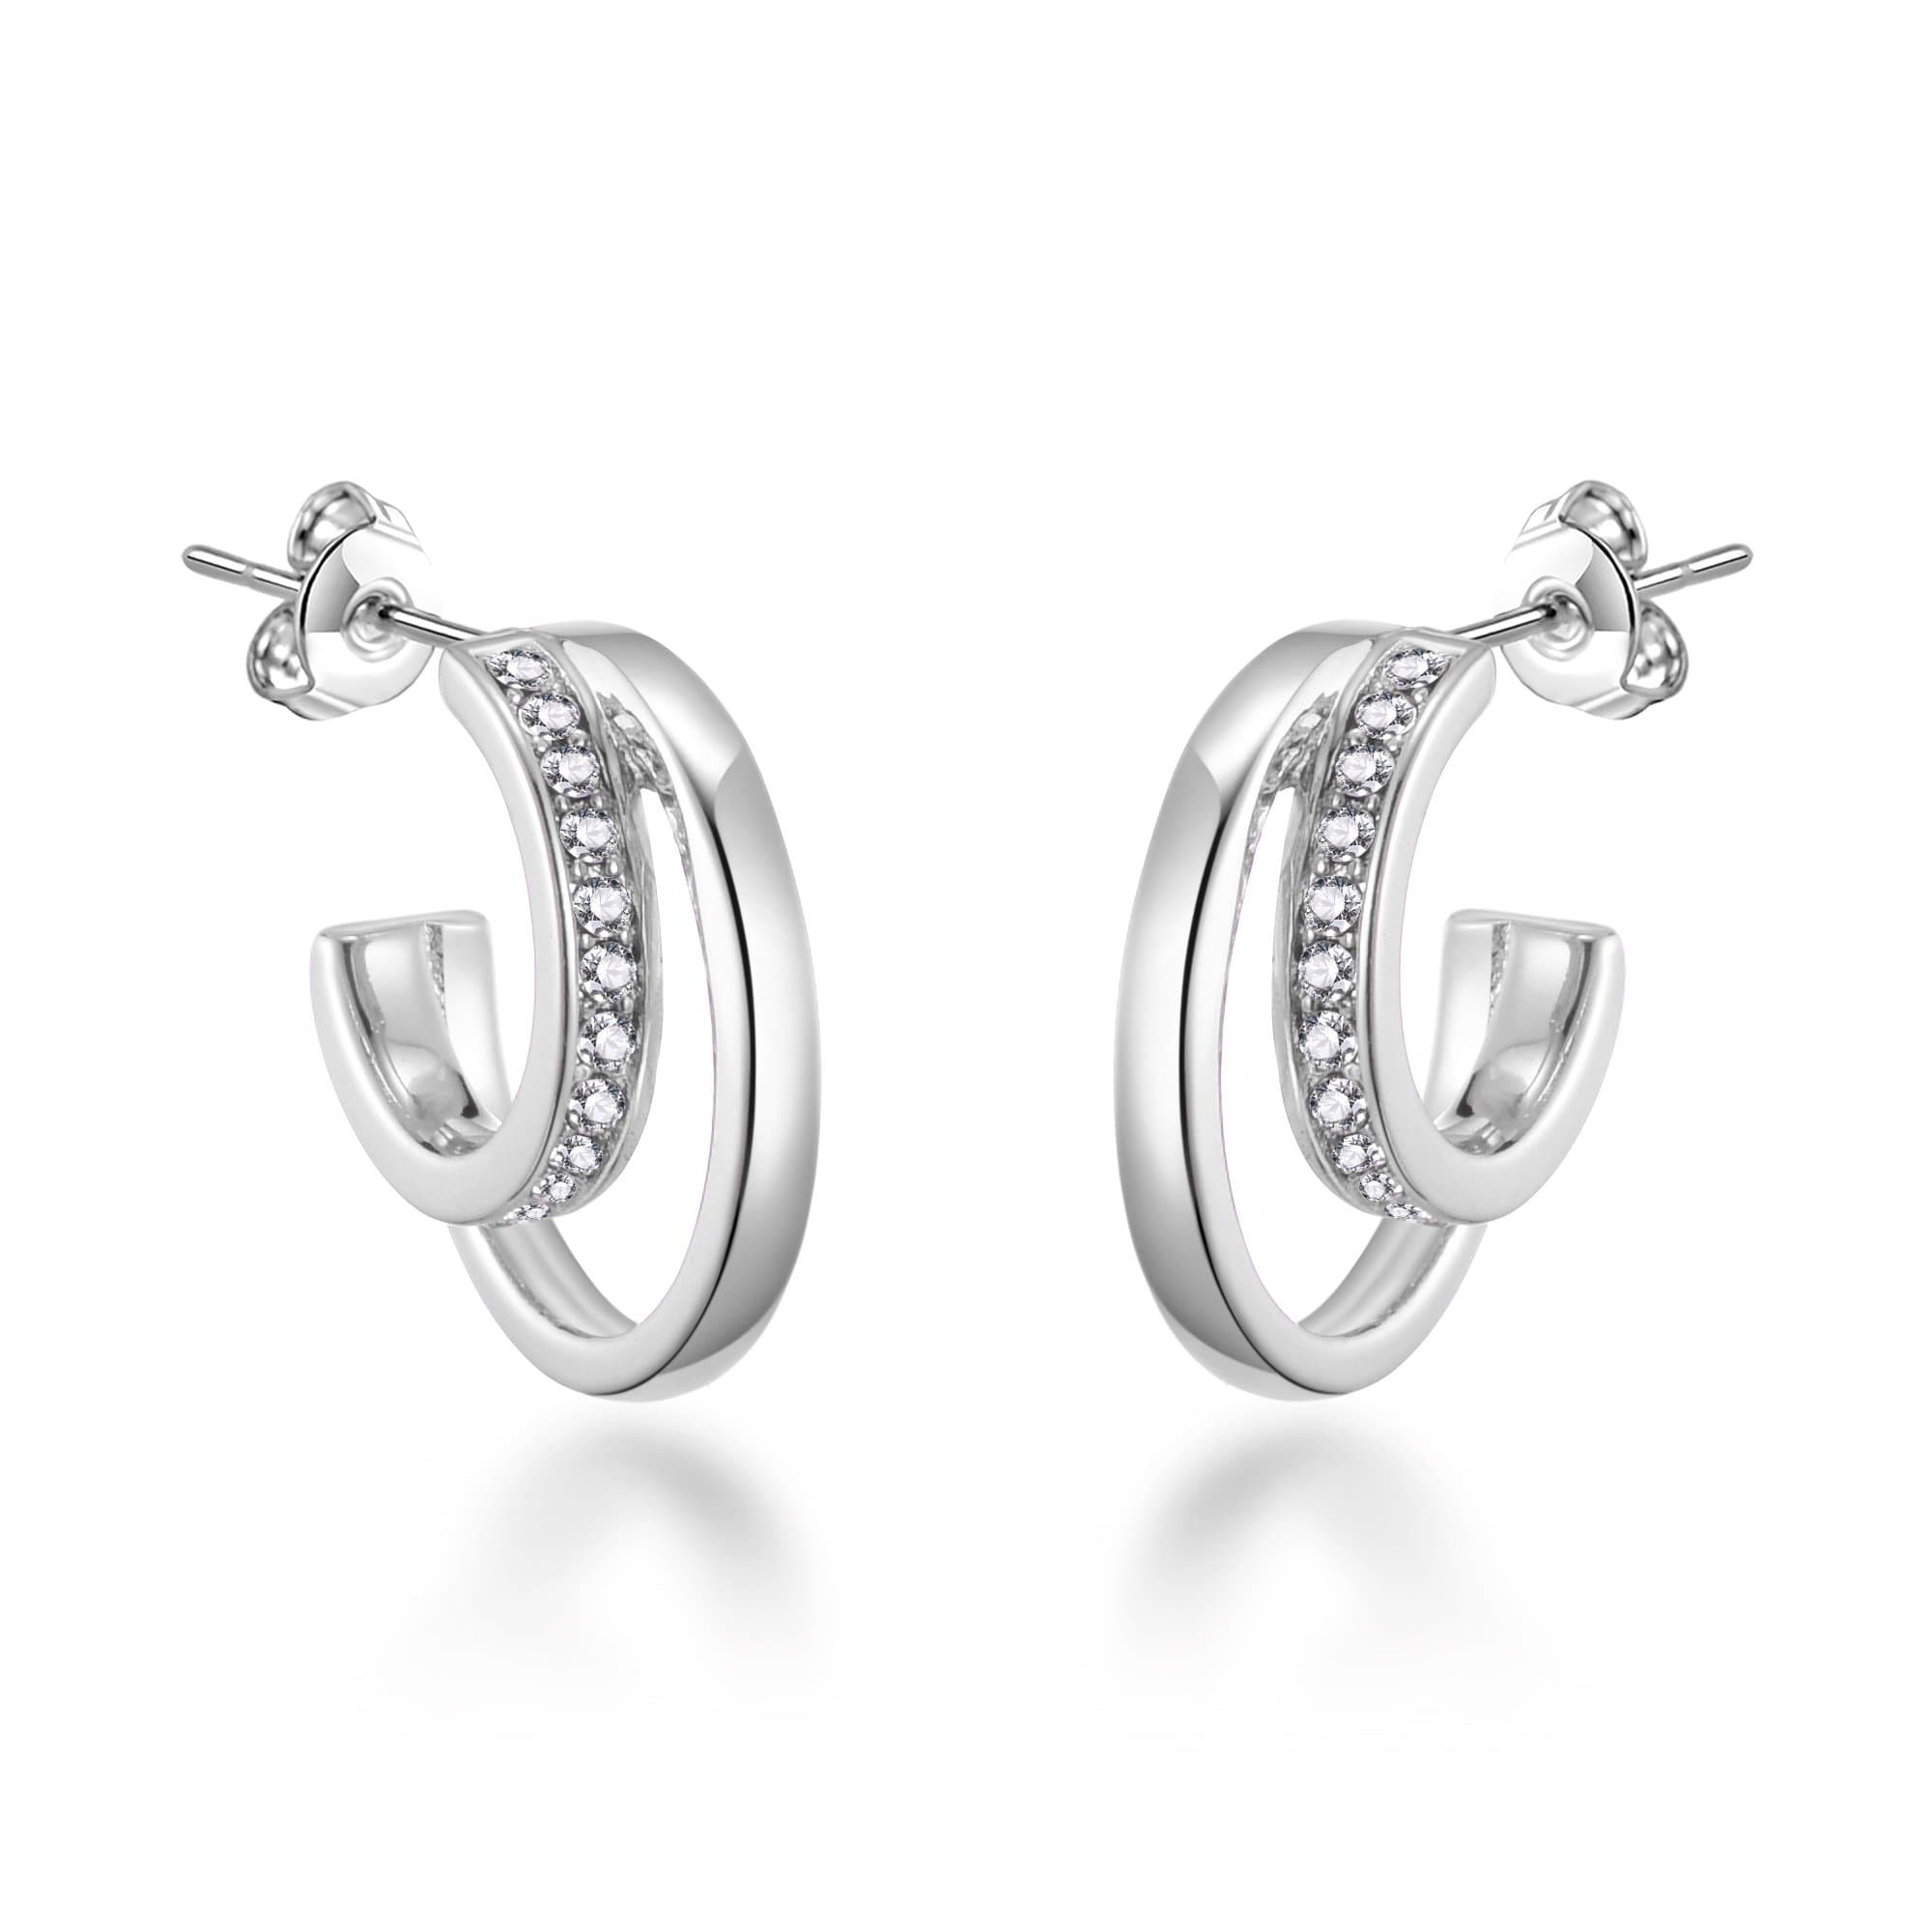 Silver Plated Open Double Hoop Earrings Created With Zircondia® Crystals by Philip Jones Jewellery